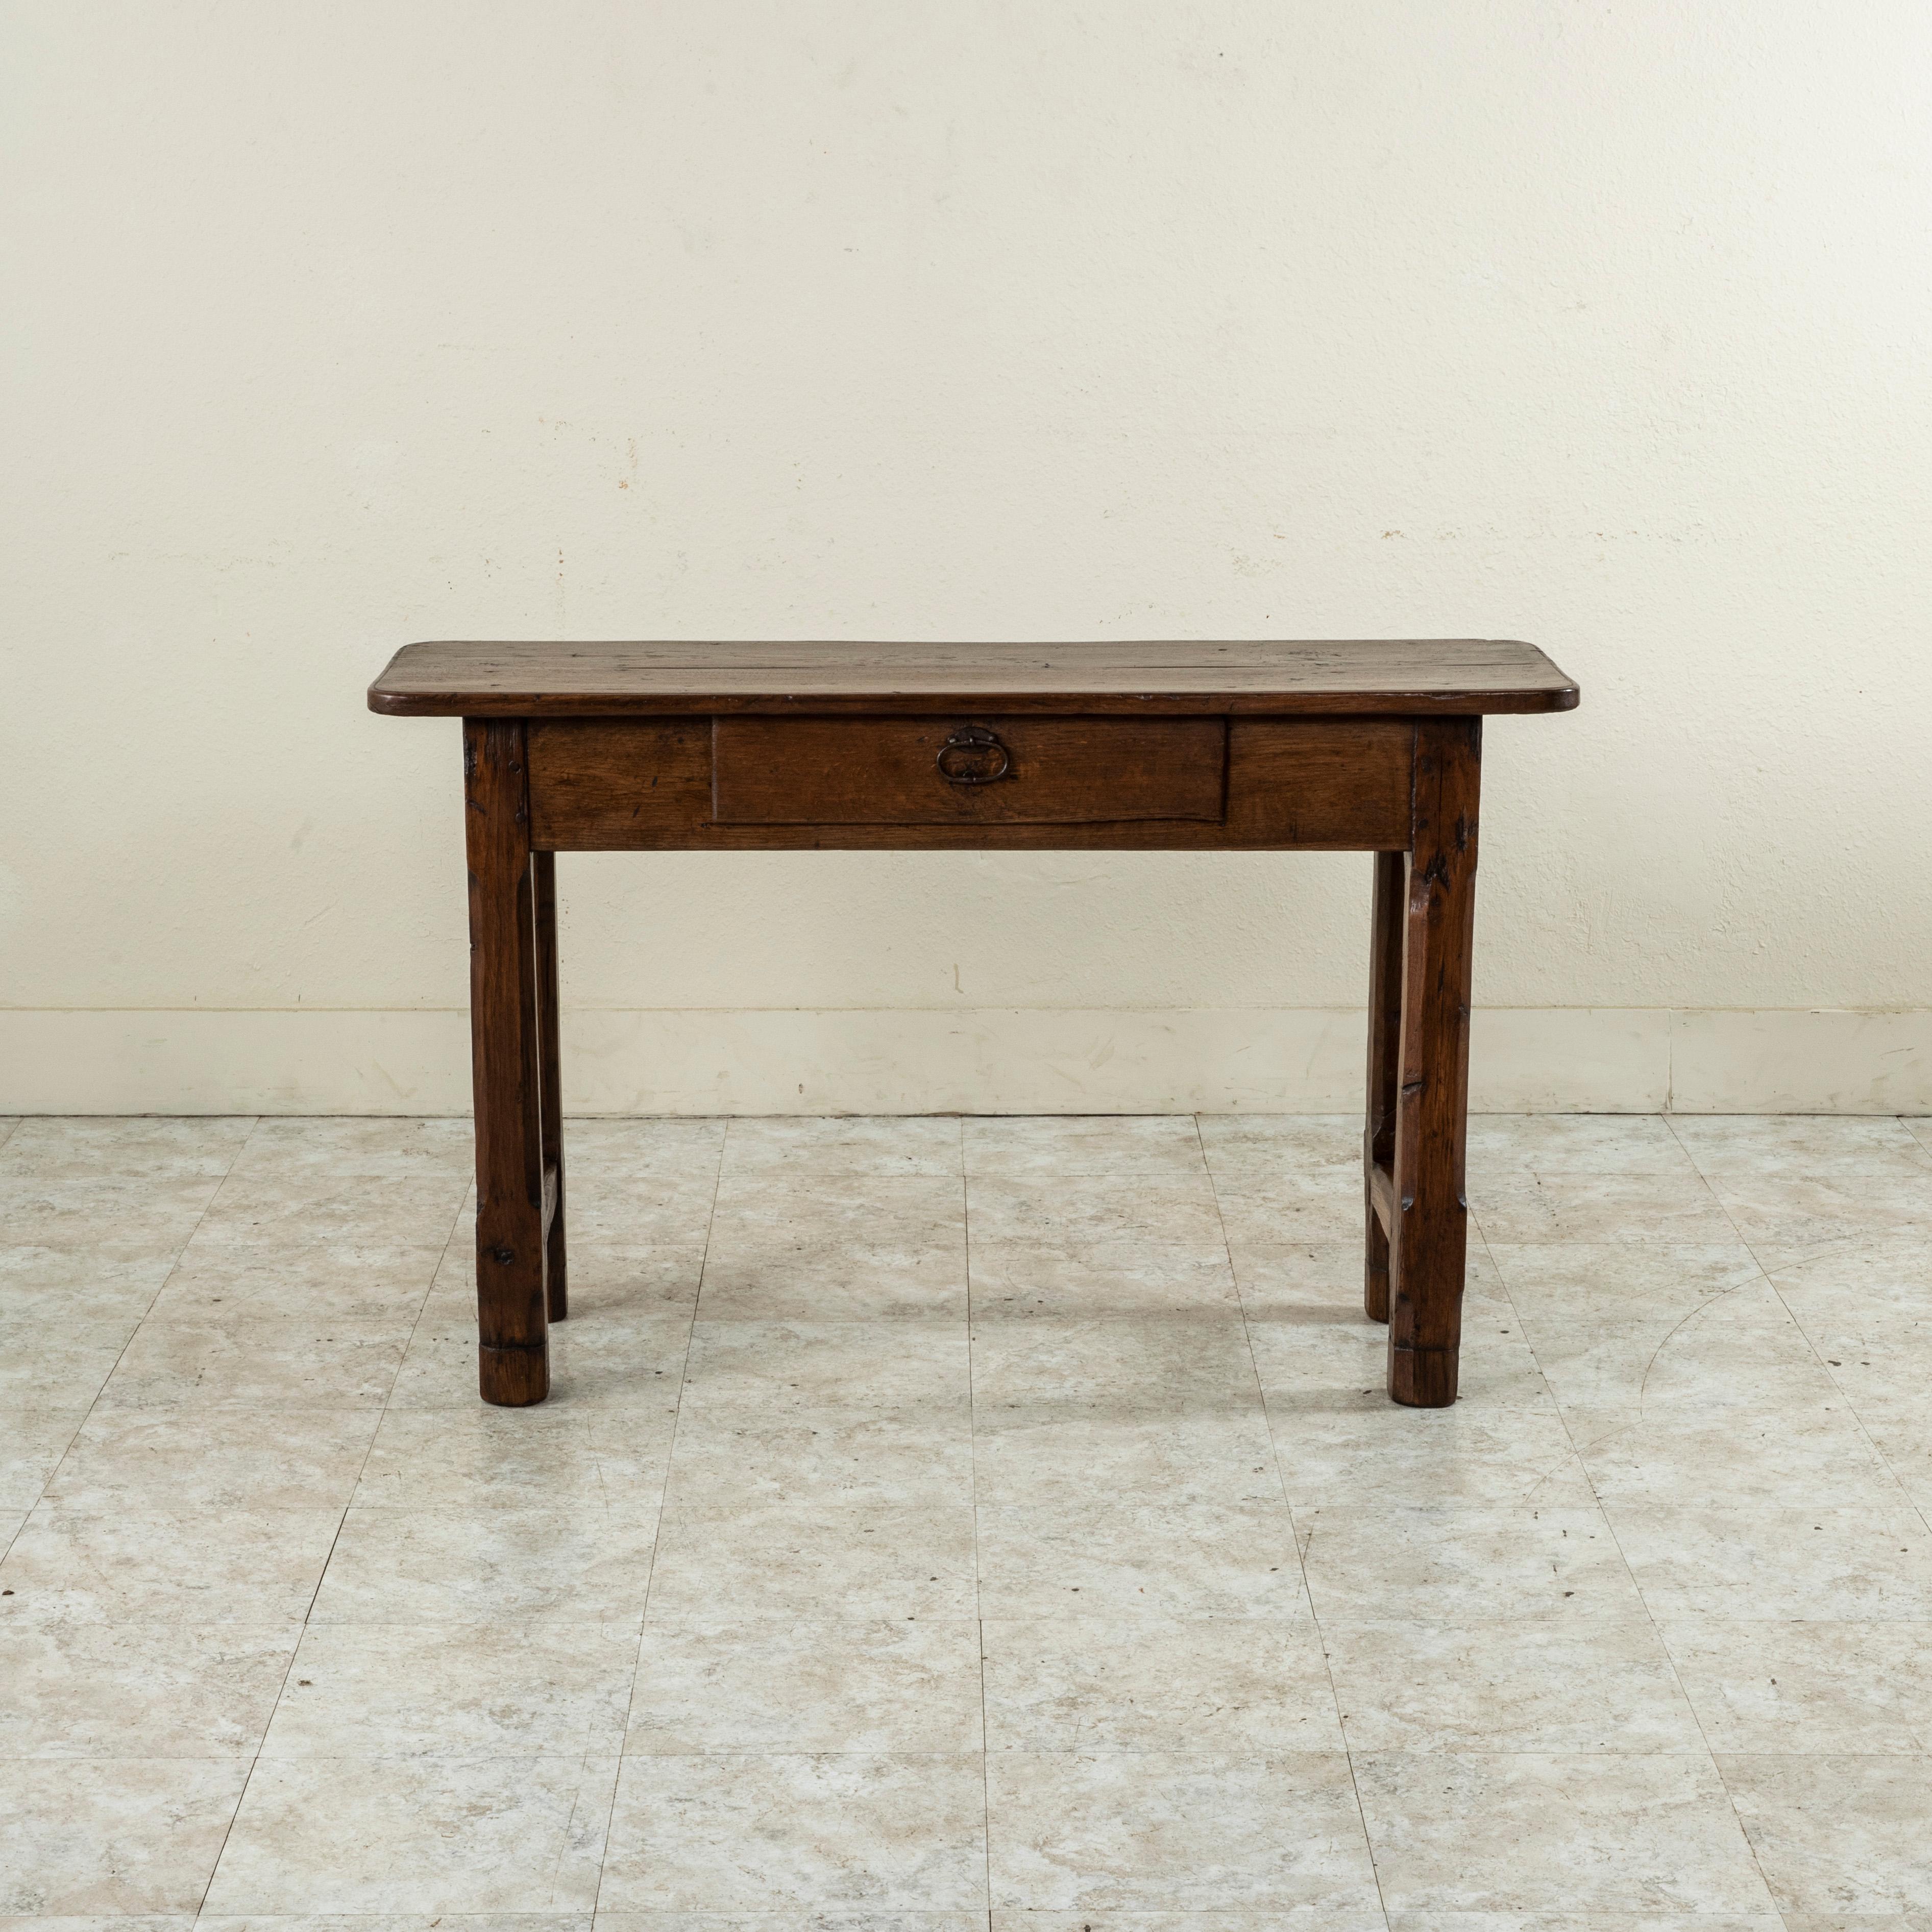 Found in the region of Normandy, France, this oak console table from the turn of the twentieth century features a hand pegged top formed from two planks of wood. A single drawer of dovetail construction fits into the apron and is fitted with an iron